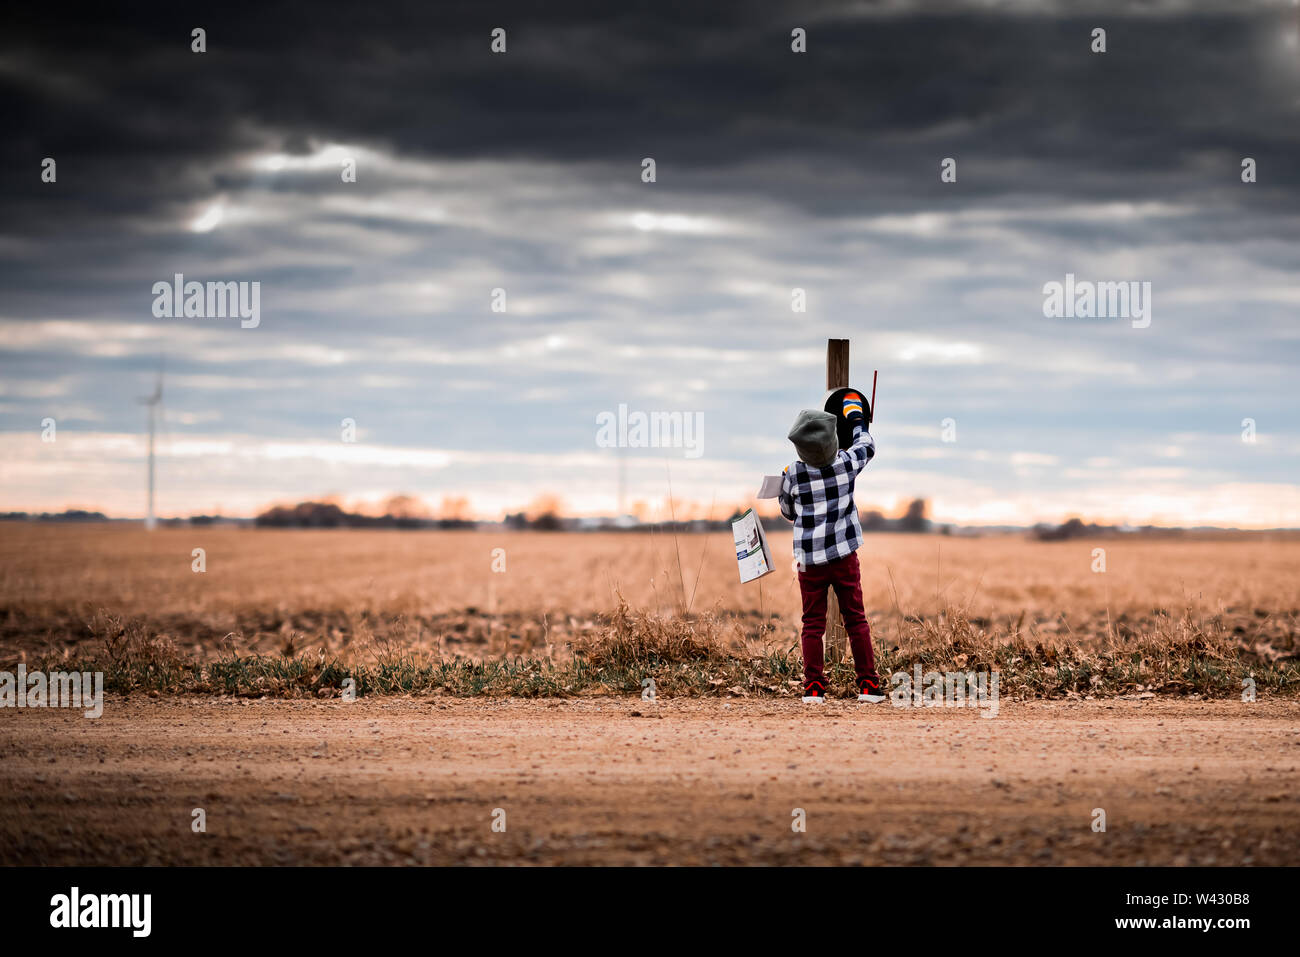 a small boy getting mail from a mailbox on a dirt road Stock Photo